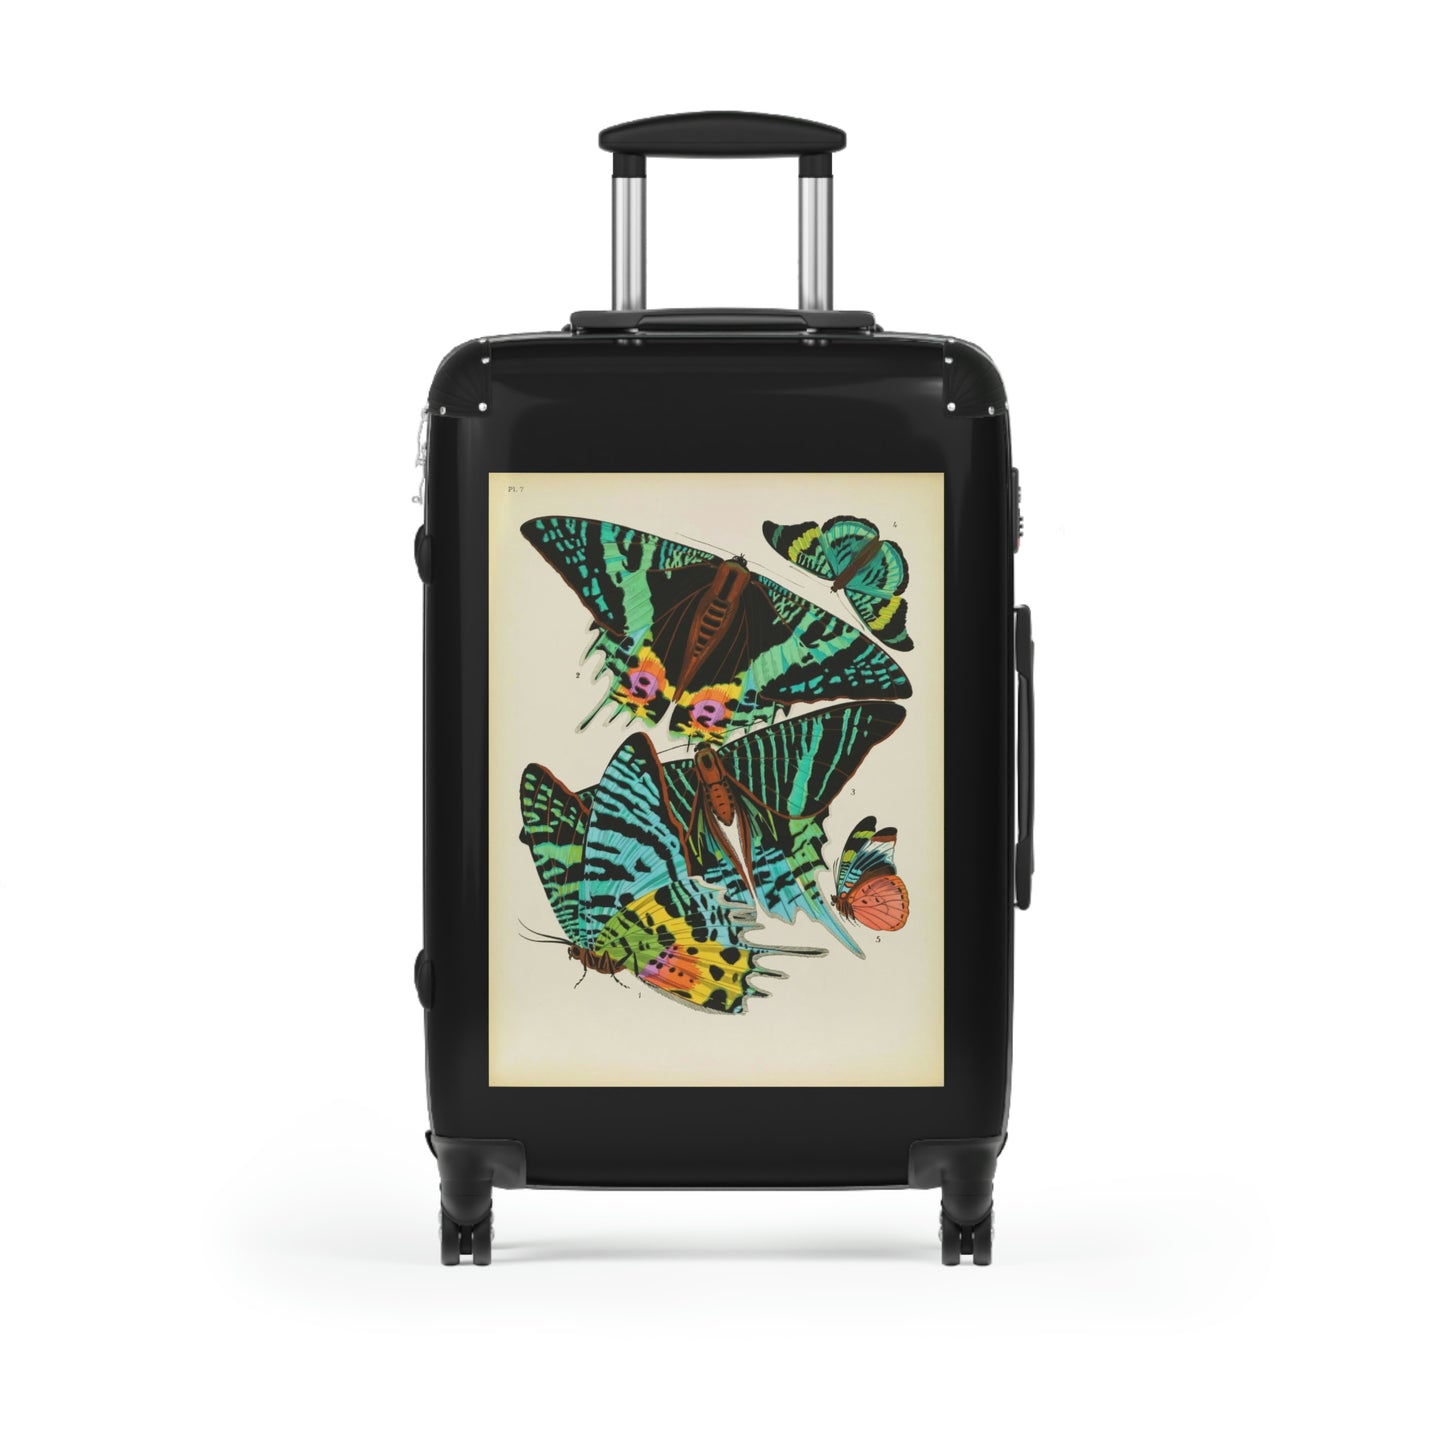 Getrott Butterflies Macrolepidopteran Rhopalocera Lepidoptera Black Red Yellow Cabin Suitcase Rolling Luggage Extended Storage Adjustable Telescopic Handle Double wheeled Polycarbonate Hard-shell Built-in Lock-Bags-Geotrott